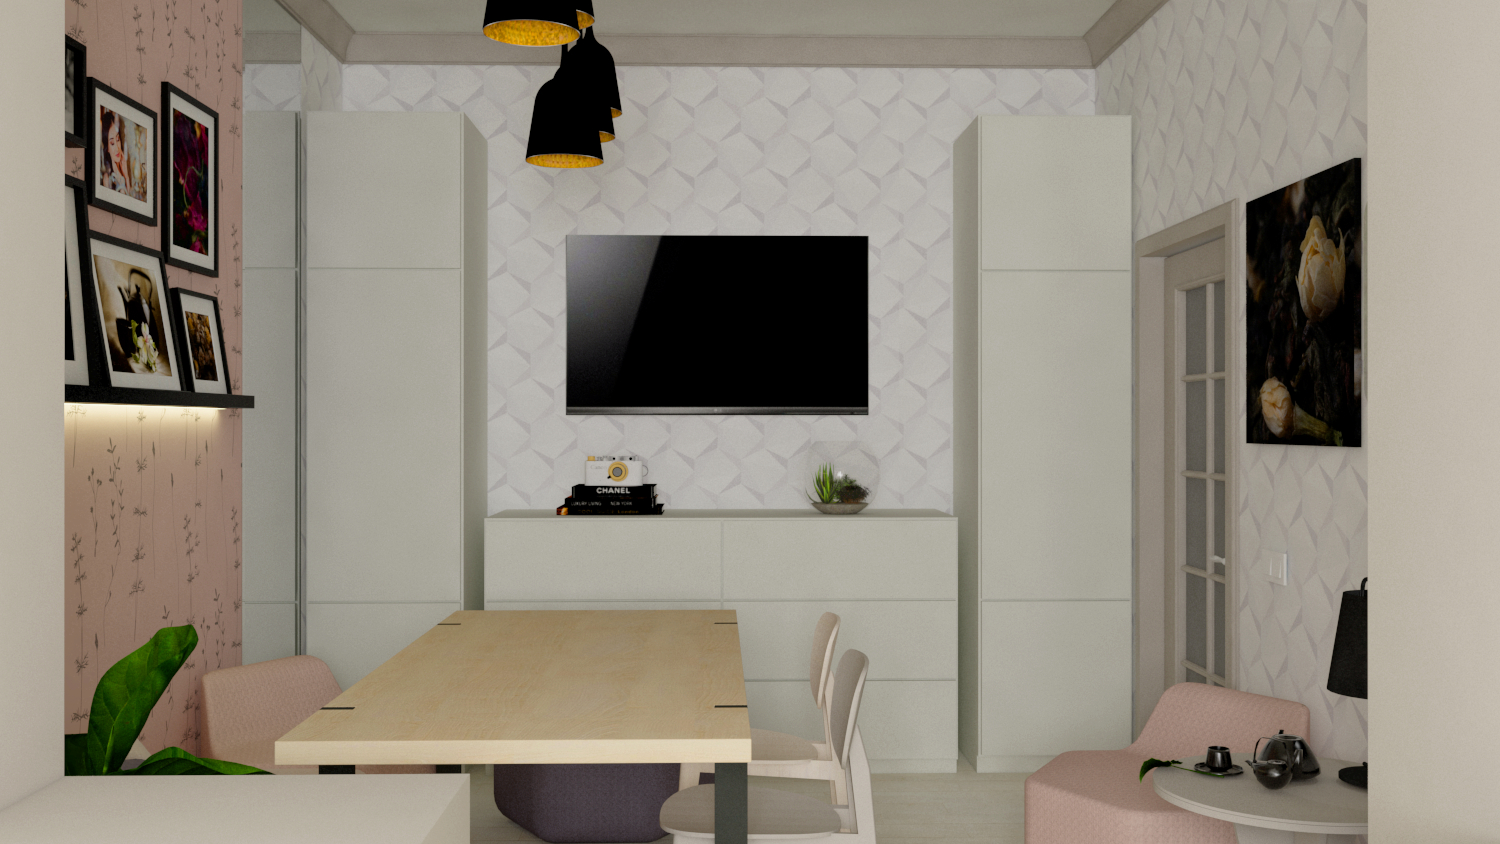 Kitchen-dining room in SketchUp vray 3.0 image